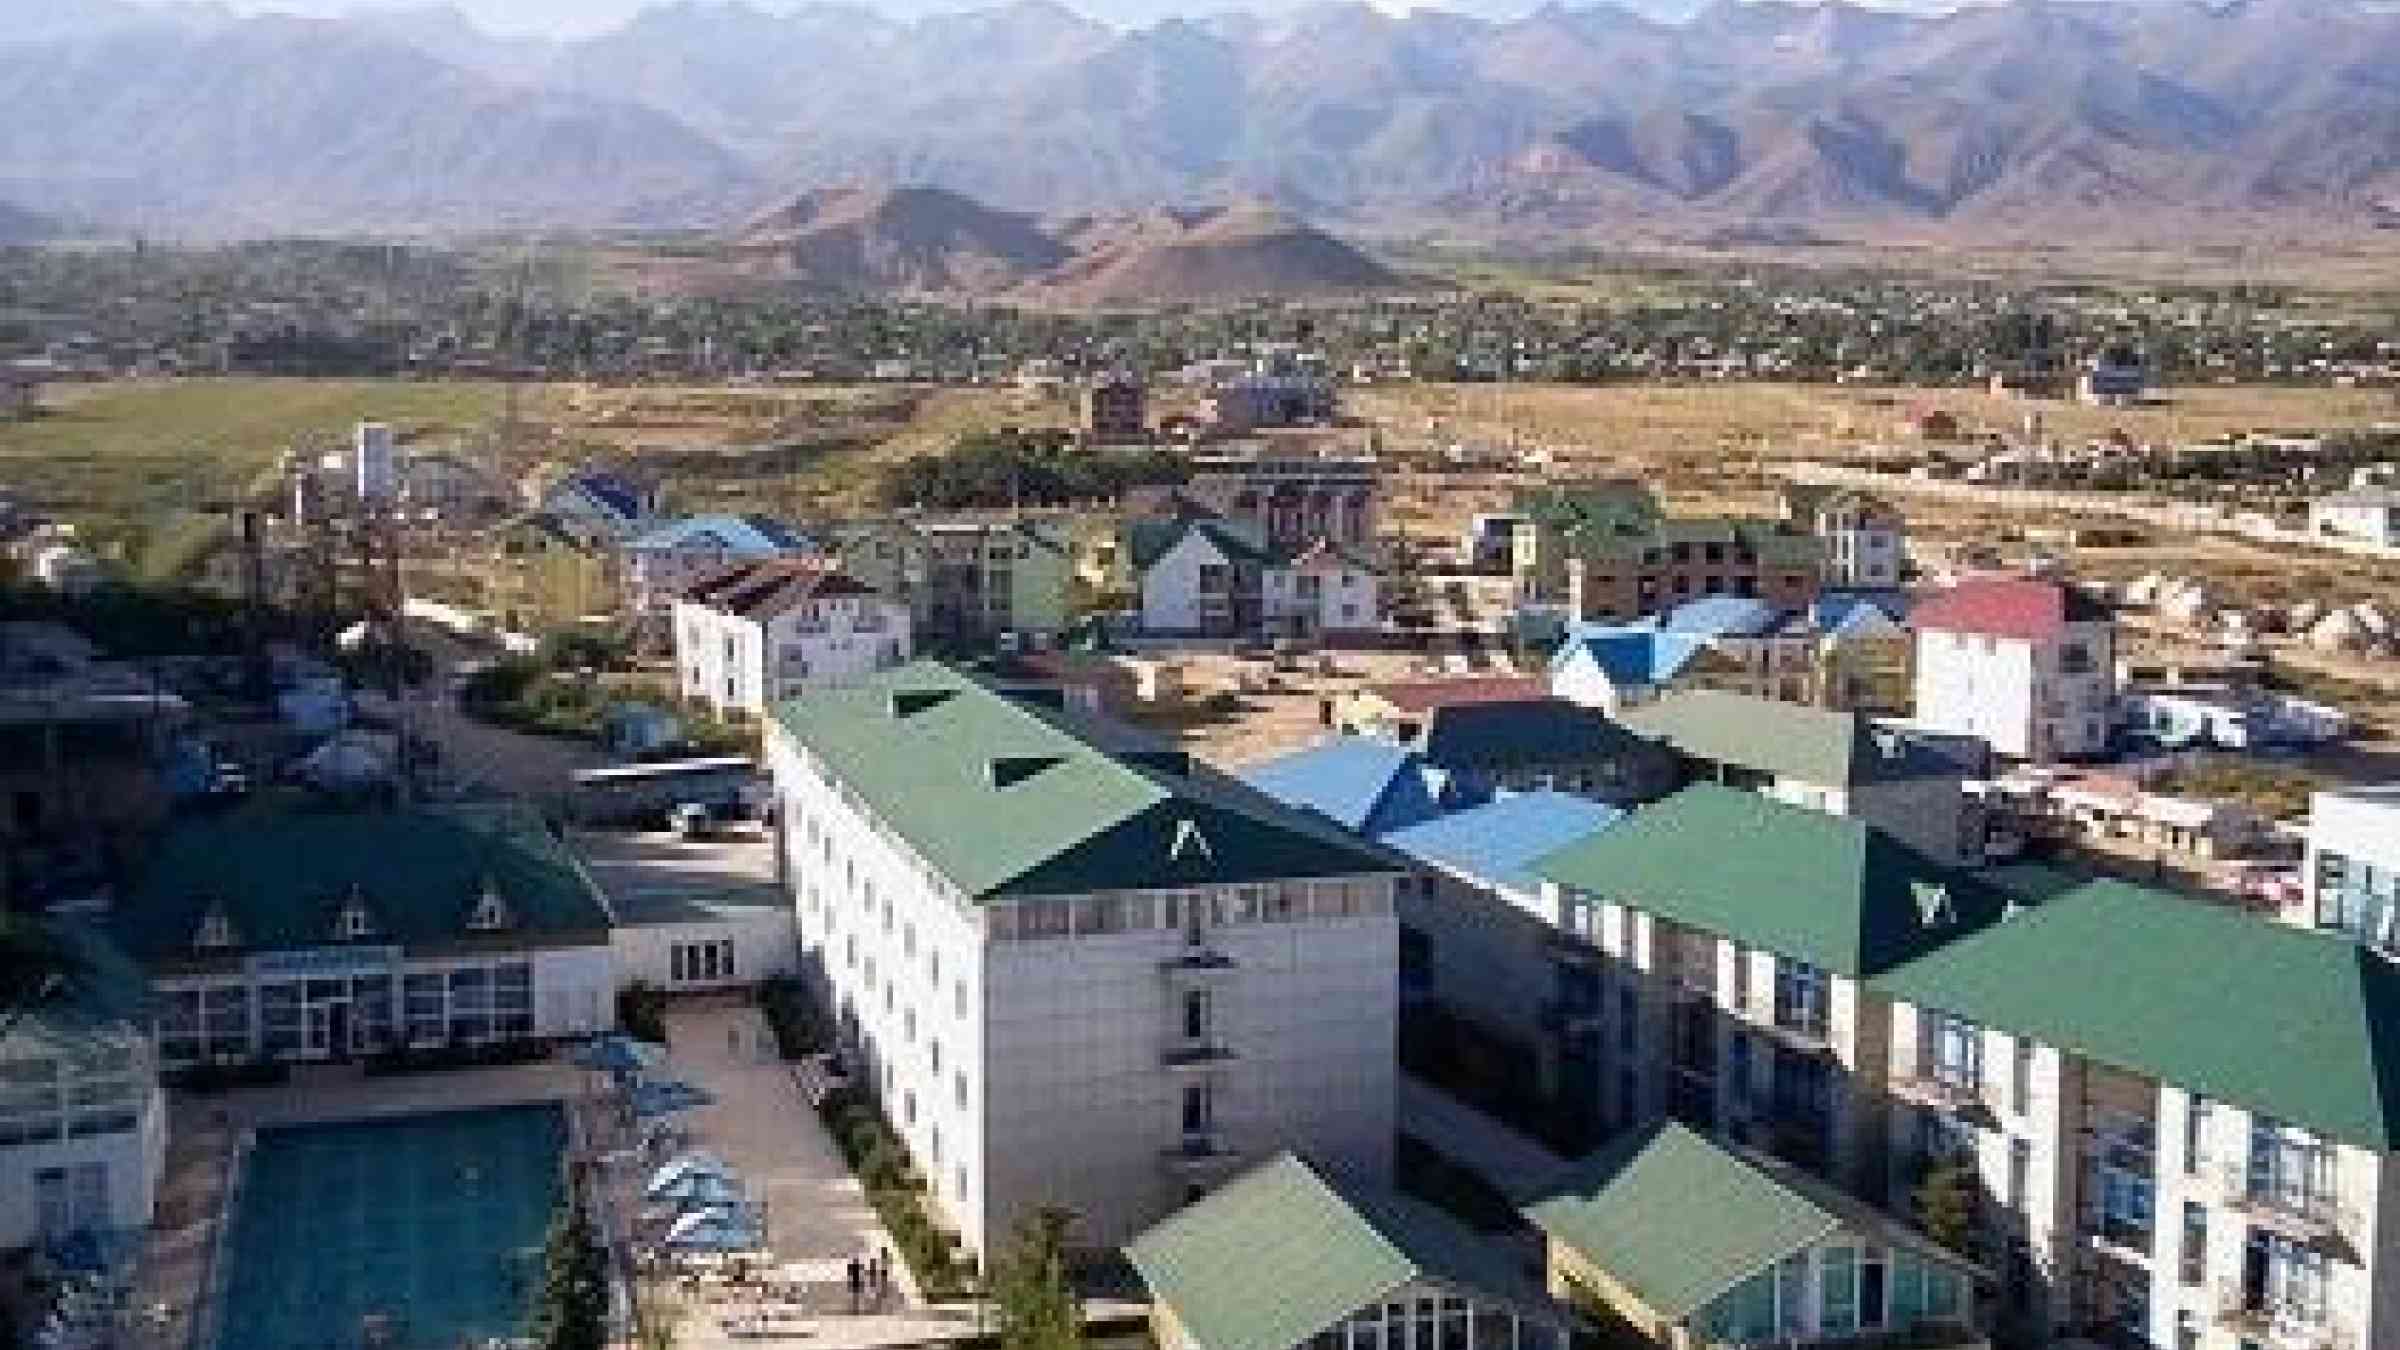 Kara-Kol, in Kyrgyzstan, is among the cities that will be helped by the ECHO-UNISDR programme to perform risk assessment, draw up risk-informed city development plans, and establish local disaster risk reduction platforms.